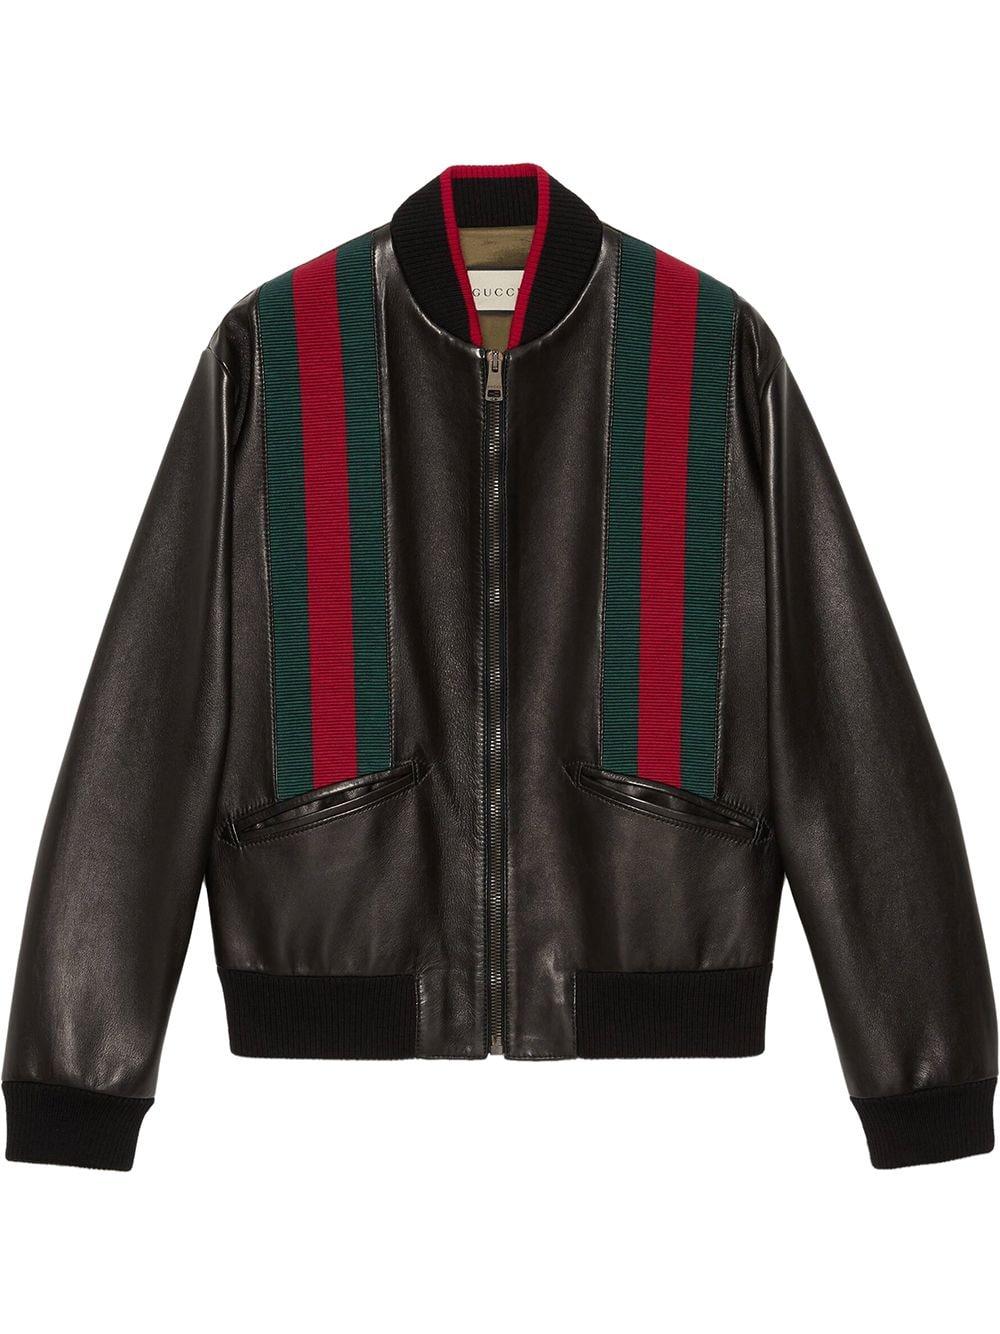 Gucci Leather Bomber Jacket With Web in Black for Men | Lyst